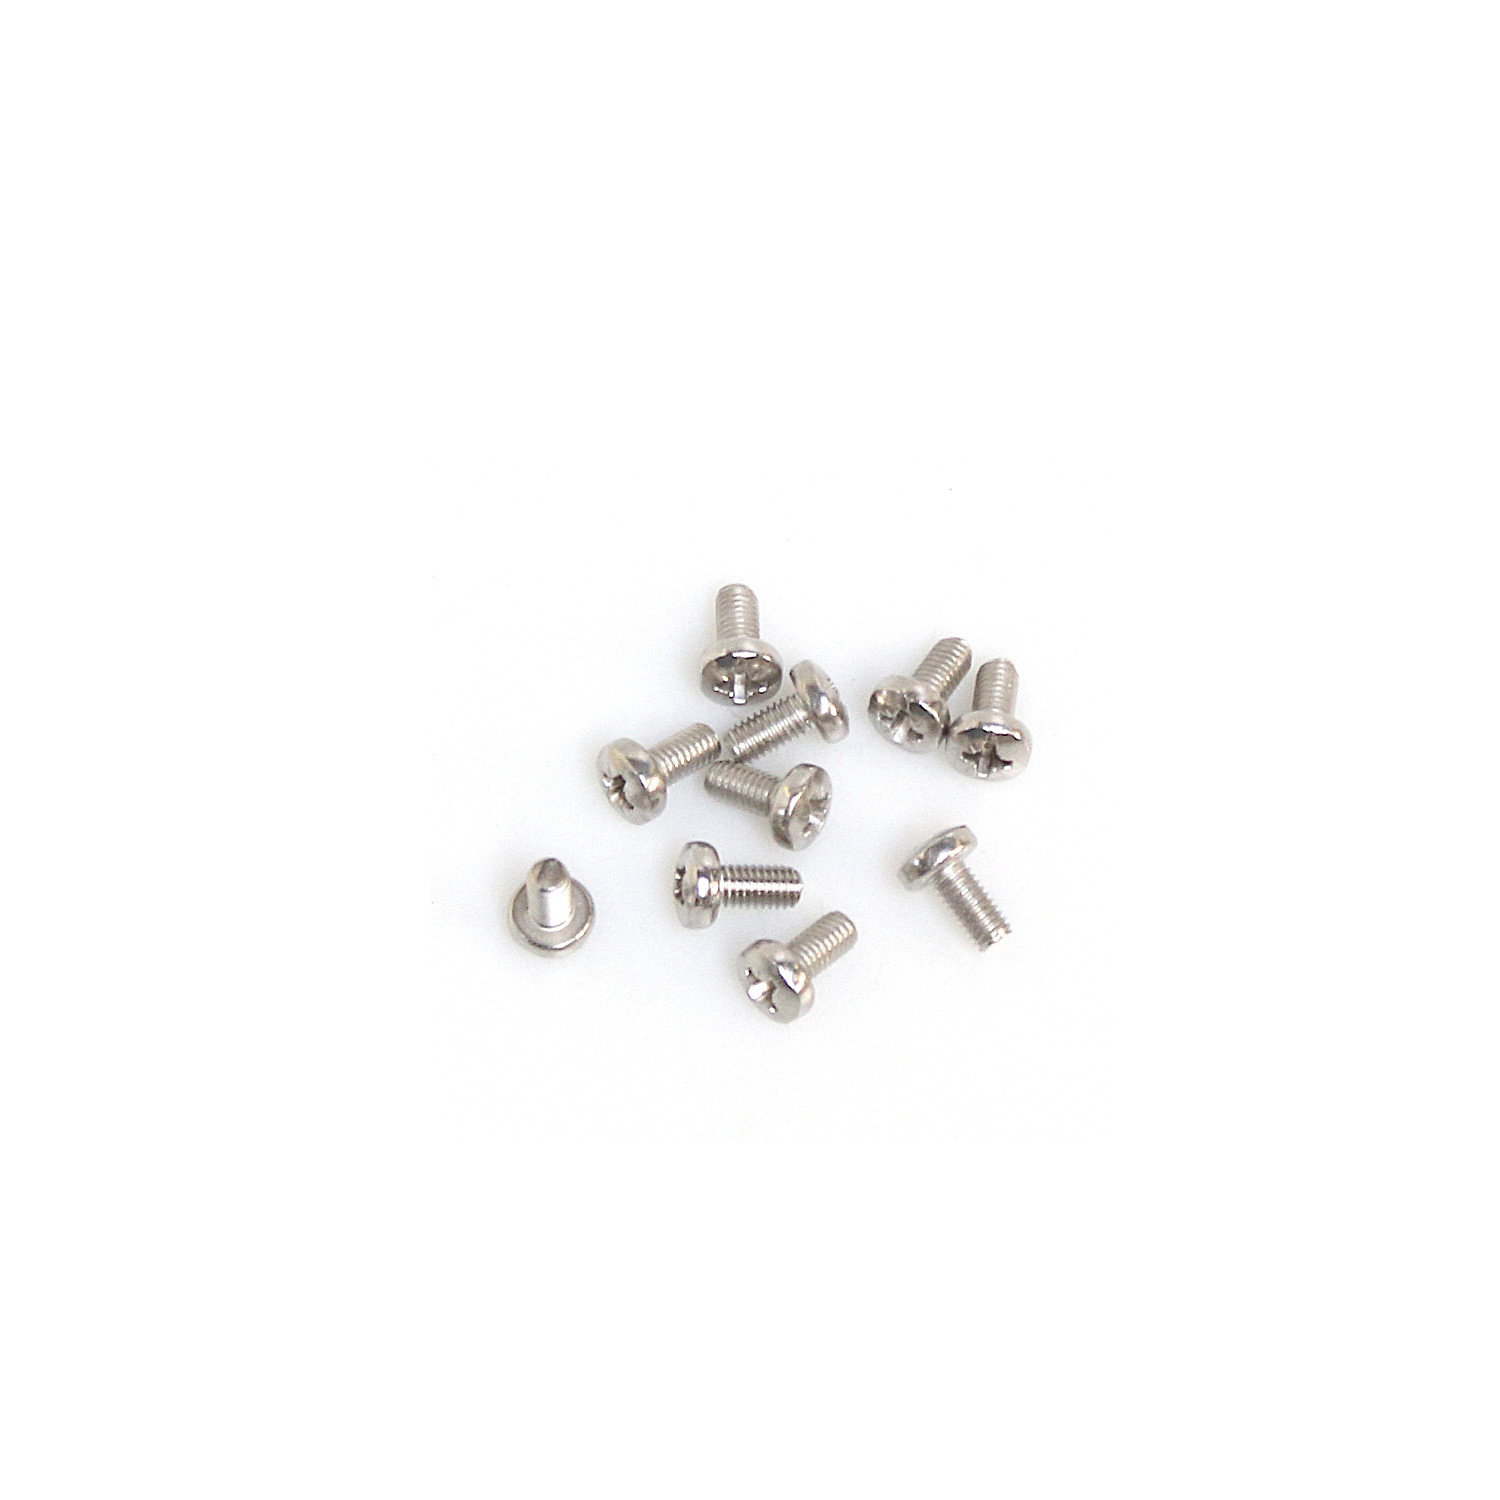 BAG WITH 10 STAINLESS 6X12 STEEL SCREWS.
replaces 2250112
